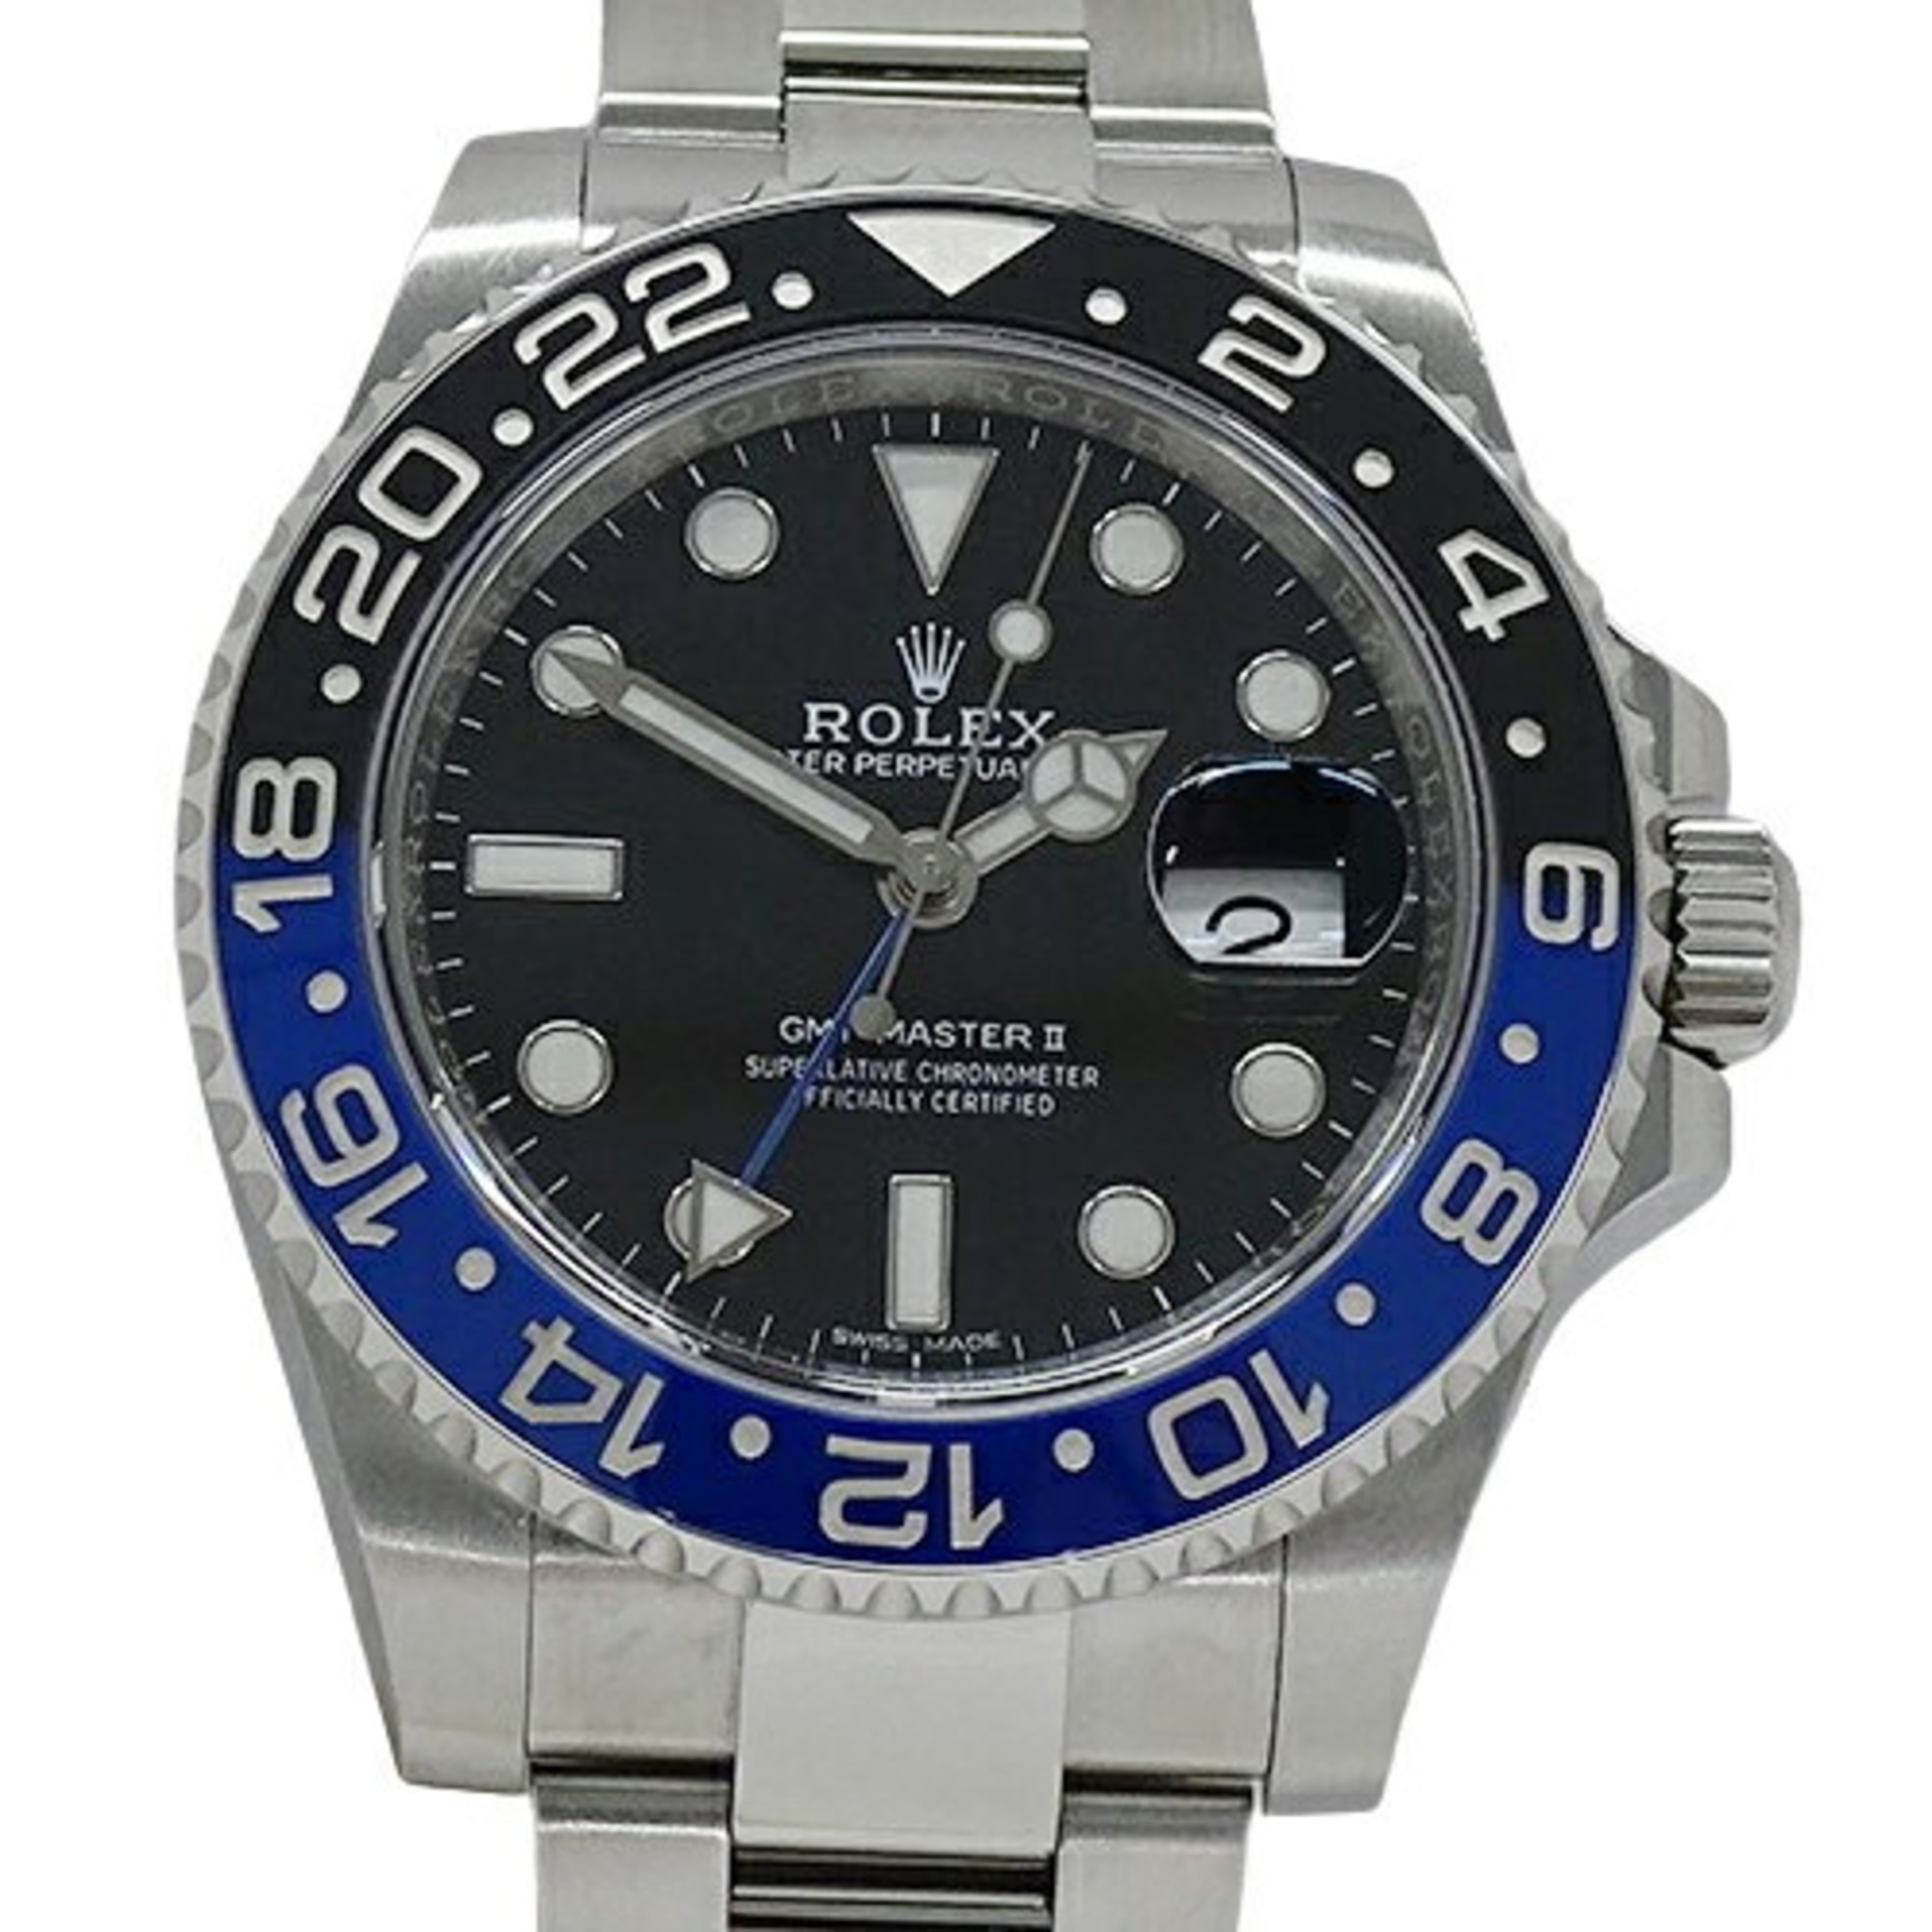 Rolex ROLEX GMT Master II 116710BLNR Random Number Watch Men's Batman Automatic AT Stainless Steel SS Silver Blue Black and Polished